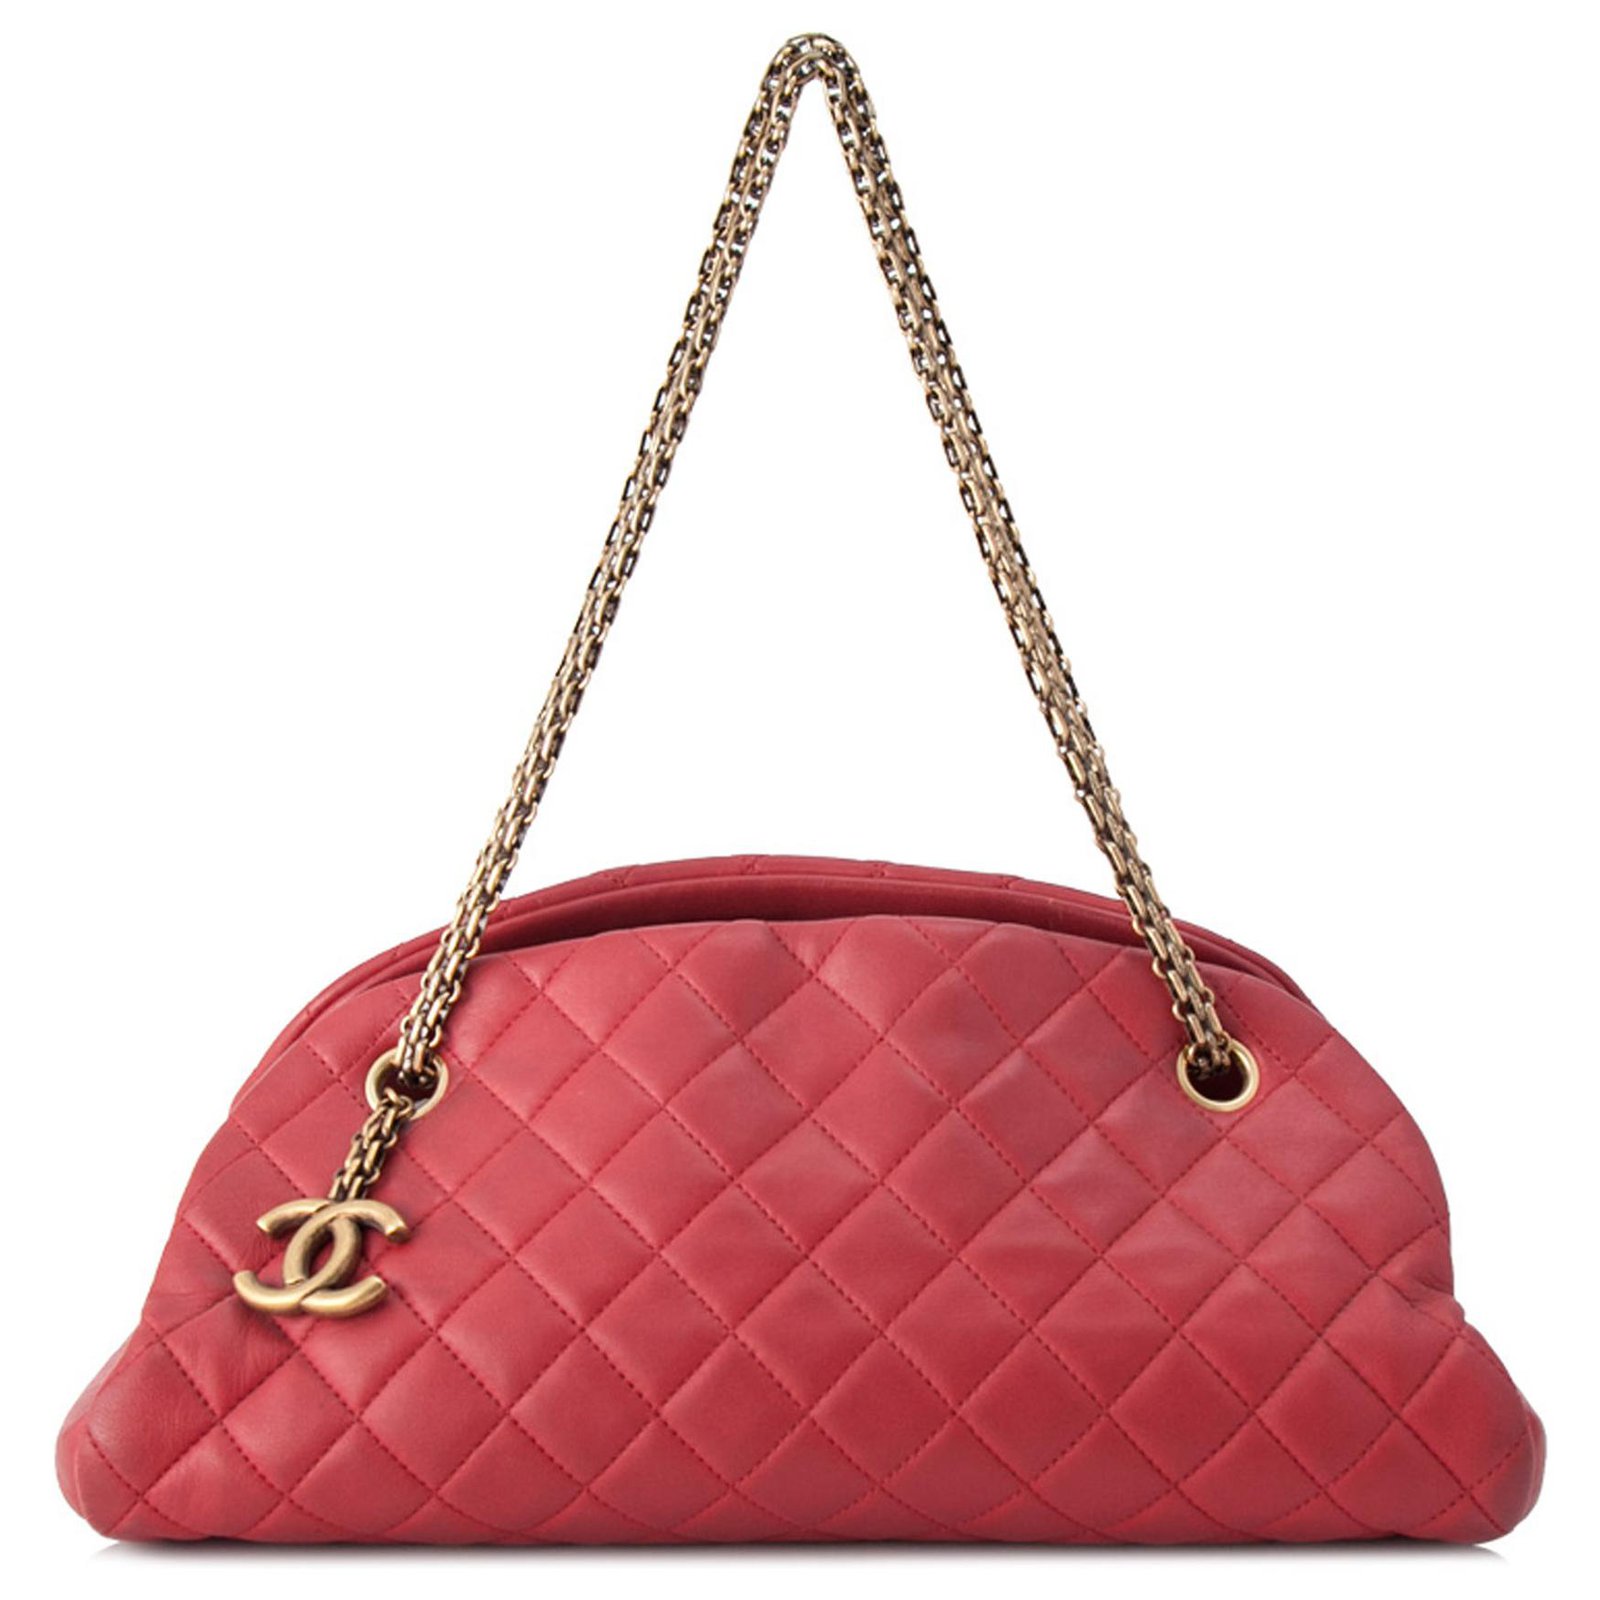 Chanel Red Mademoiselle Leather Bowling Bag